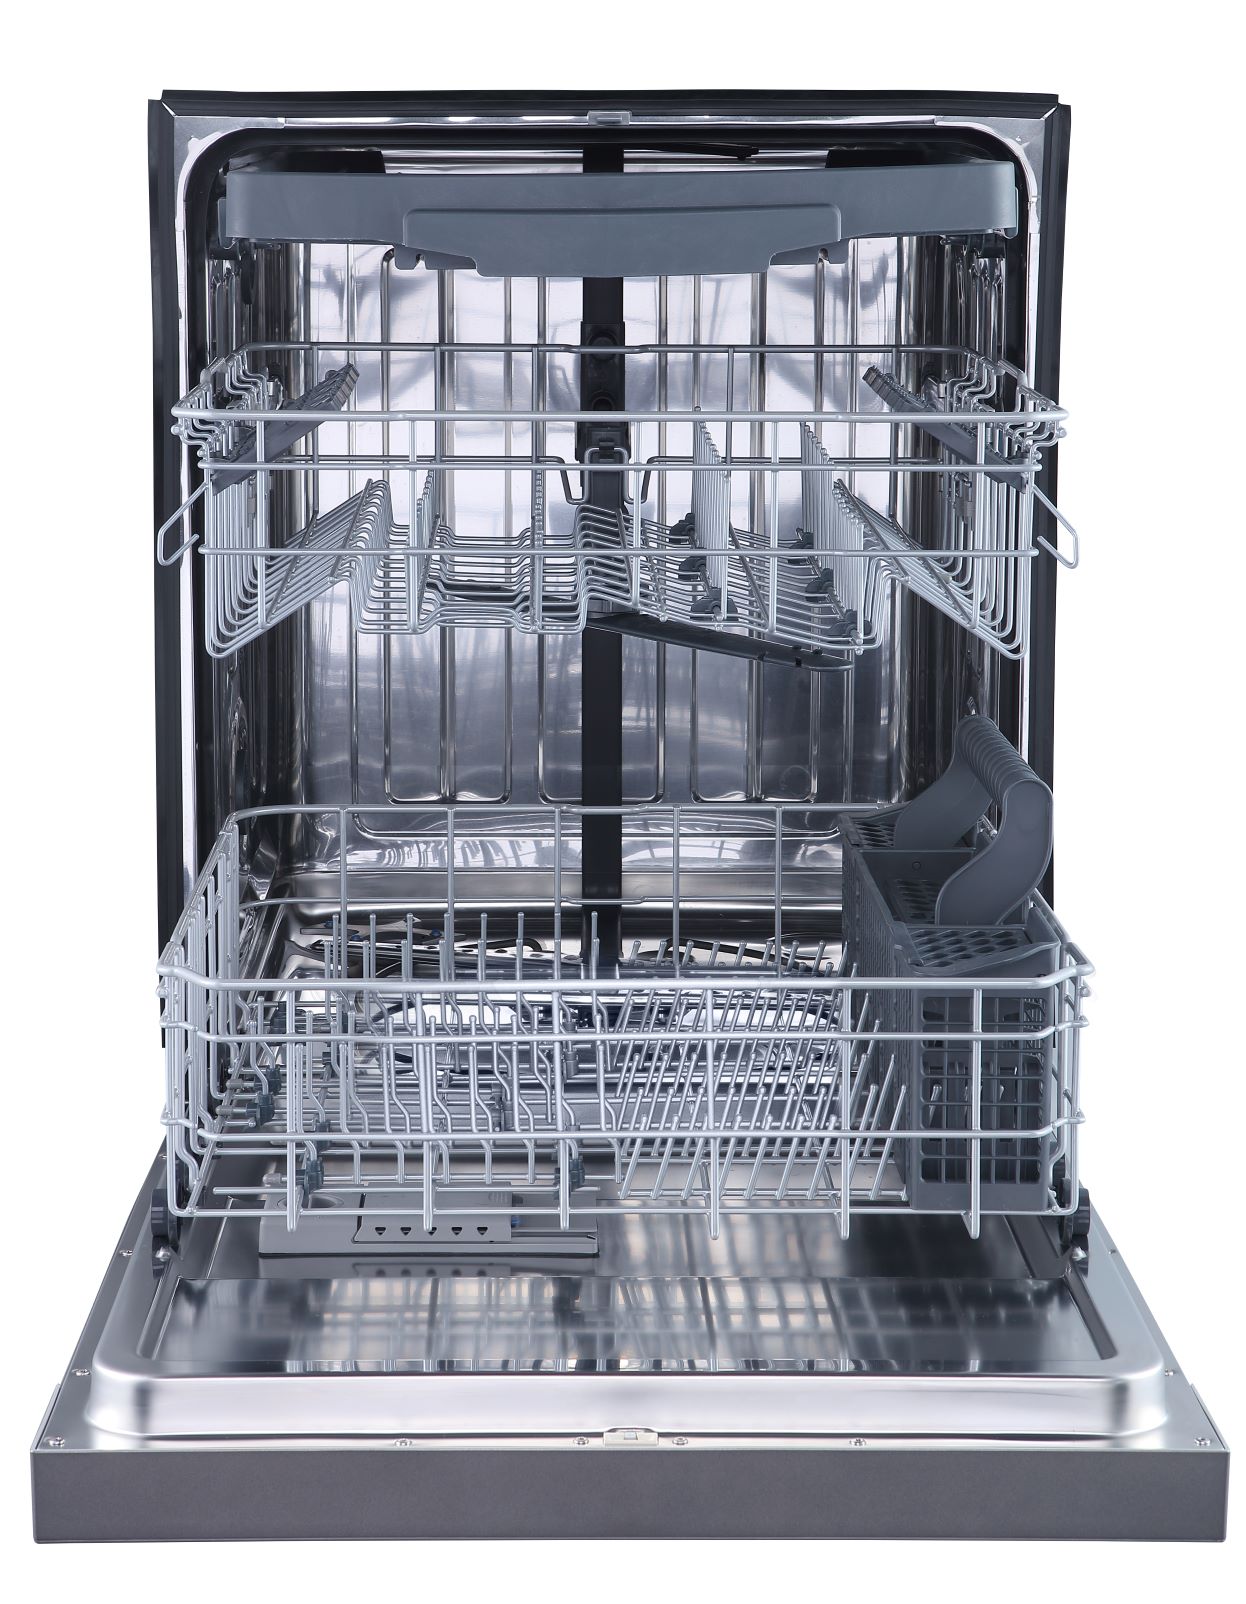 GE Slate 24" Built-In Front Control Dishwasher - GBF655SMPES